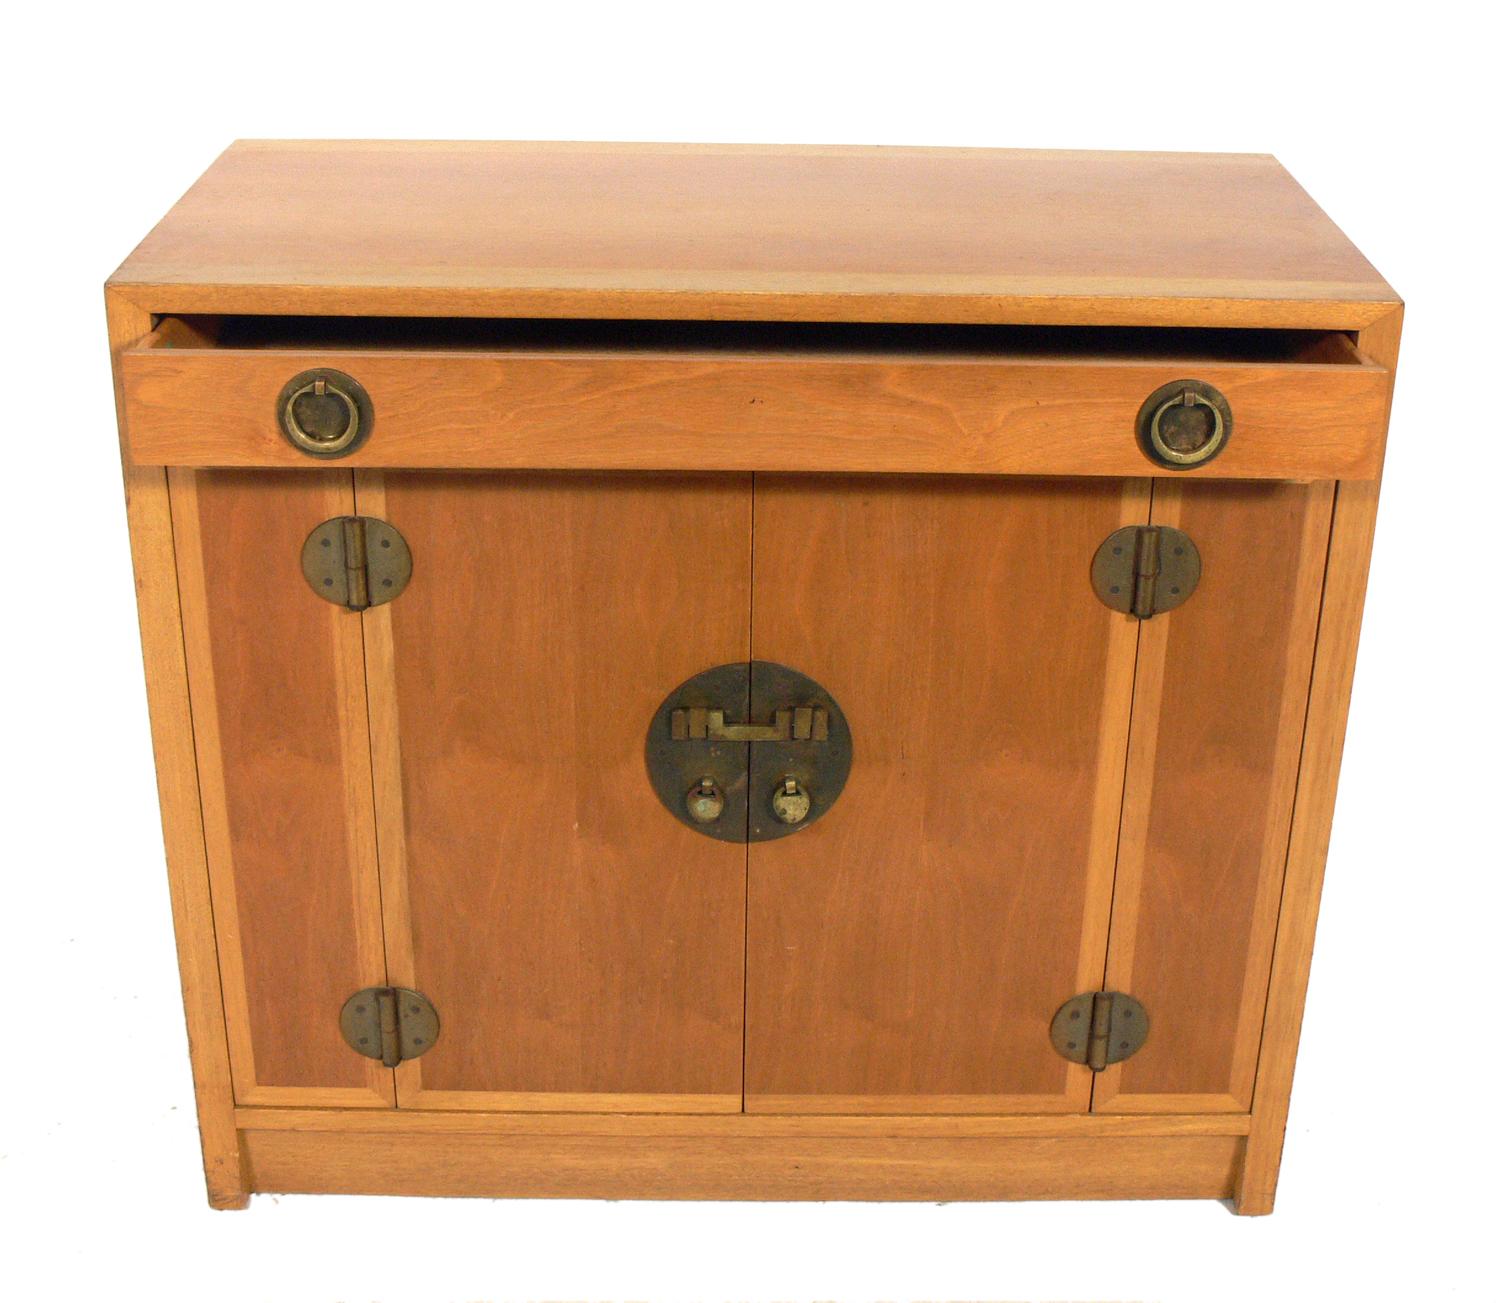 Mid-Century Modern Asian Influenced Credenza or Cabinet by Dunbar